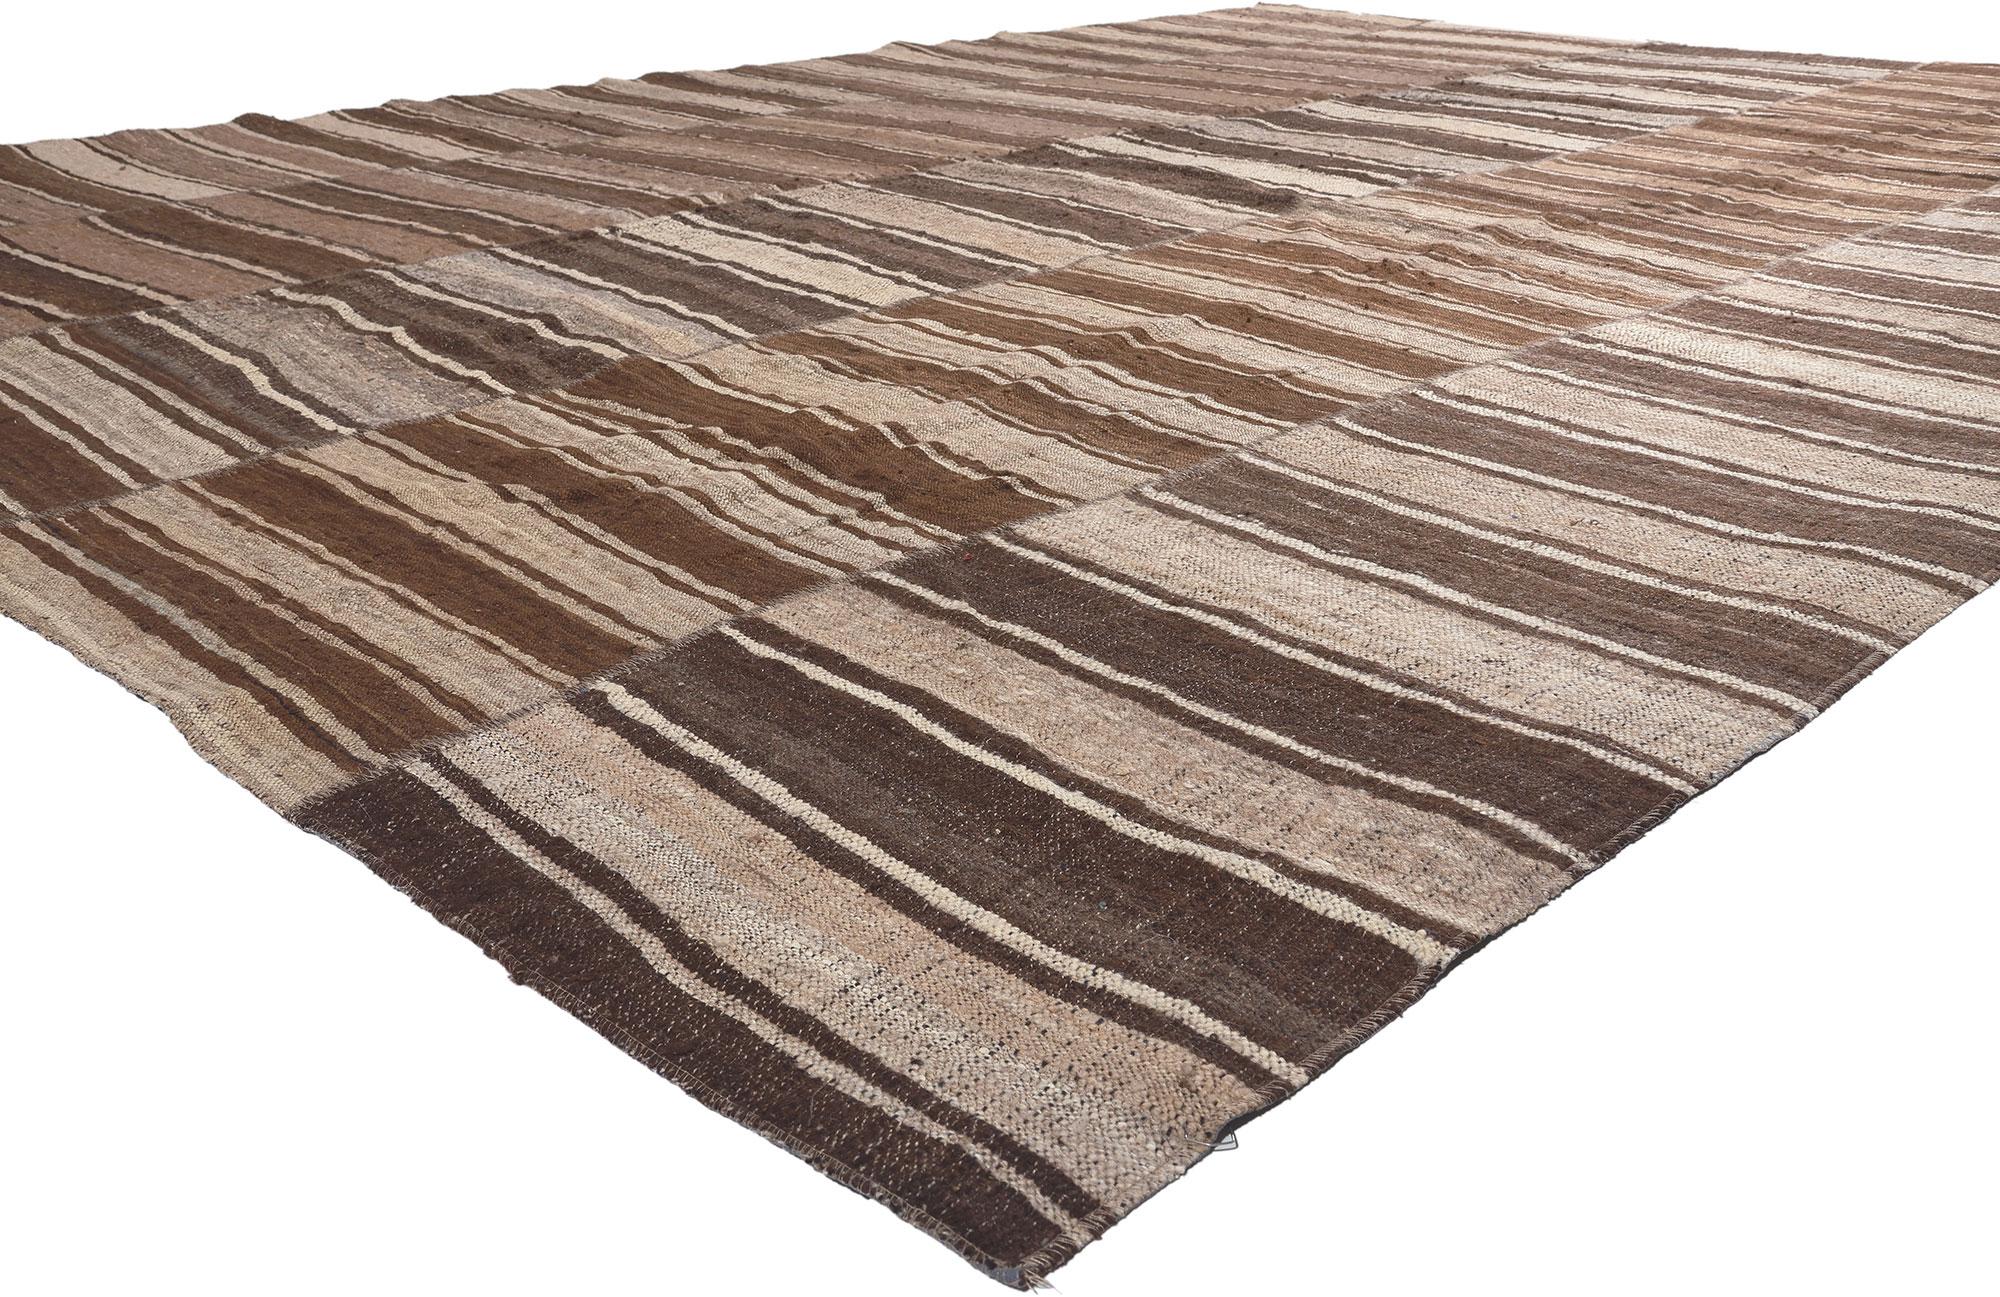 60633 Brown Vintage Striped Turkish Kilim Rug, 10'09 x 14'03. In the crafting of this vintage Turkish kilim rug, the spirit of Wabi-Sabi seamlessly entwines with sustainable design, resulting in a masterpiece that harmoniously fuses rustic charm